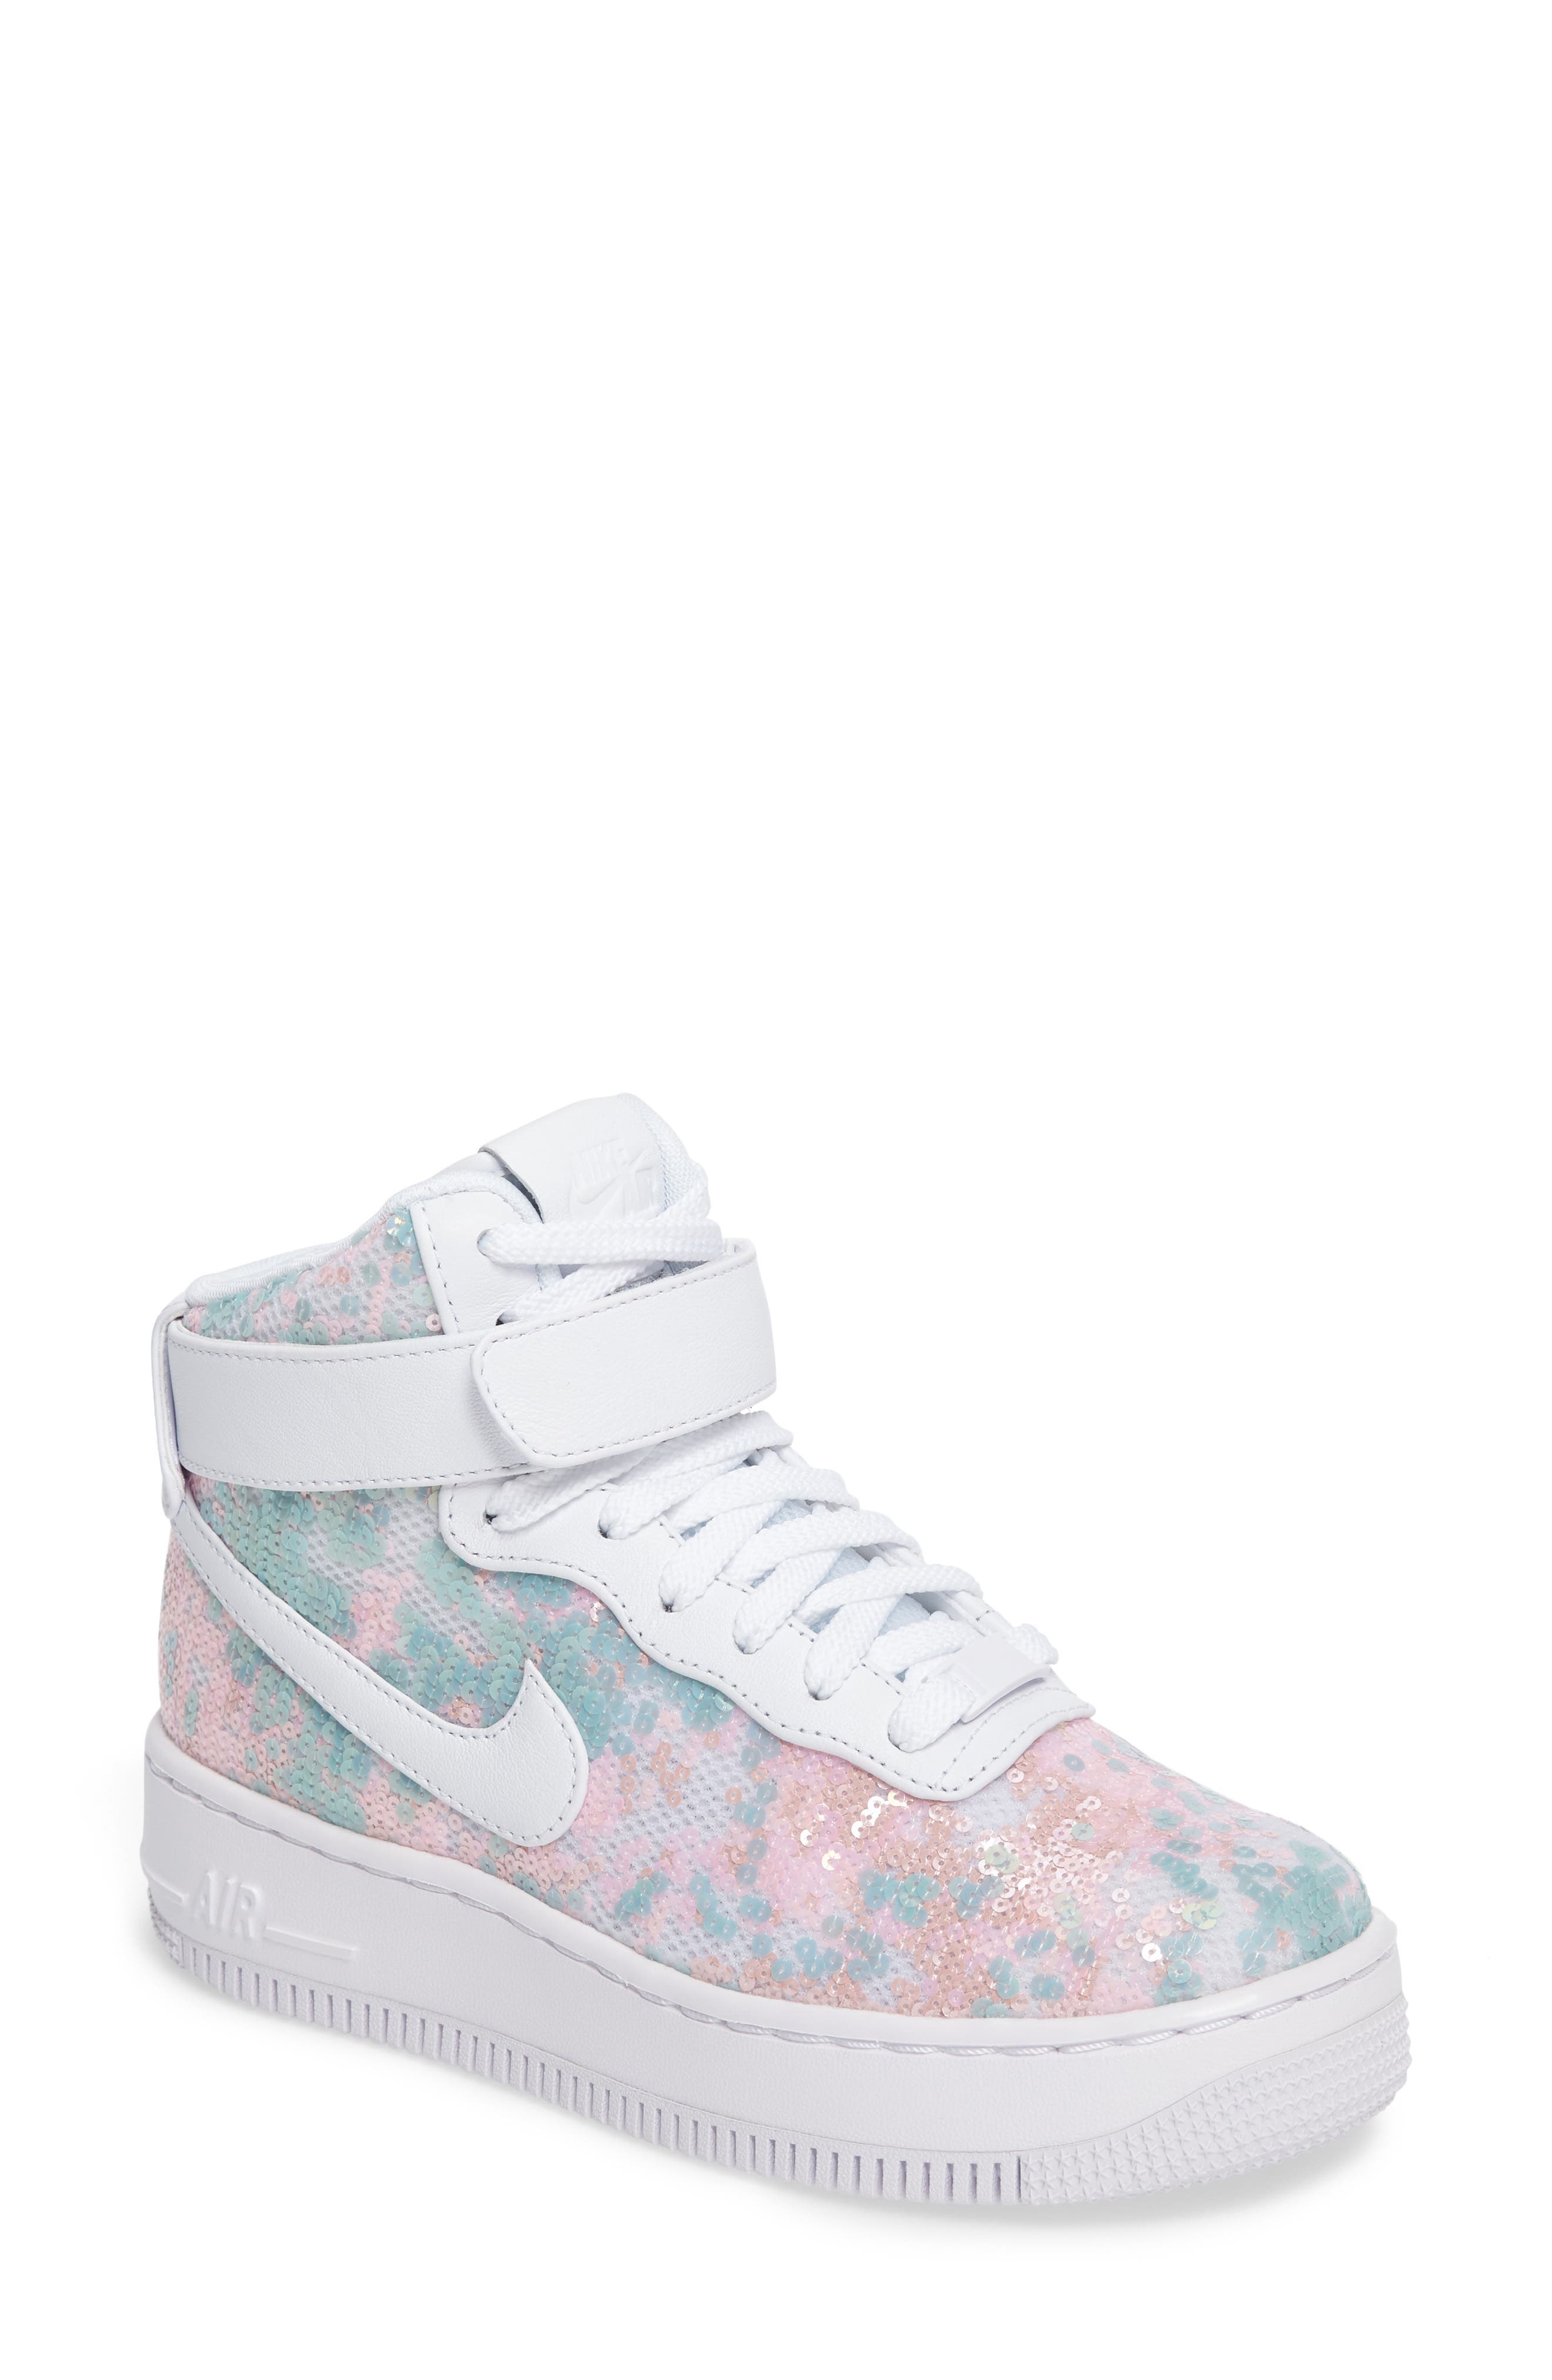 women's high top air forces